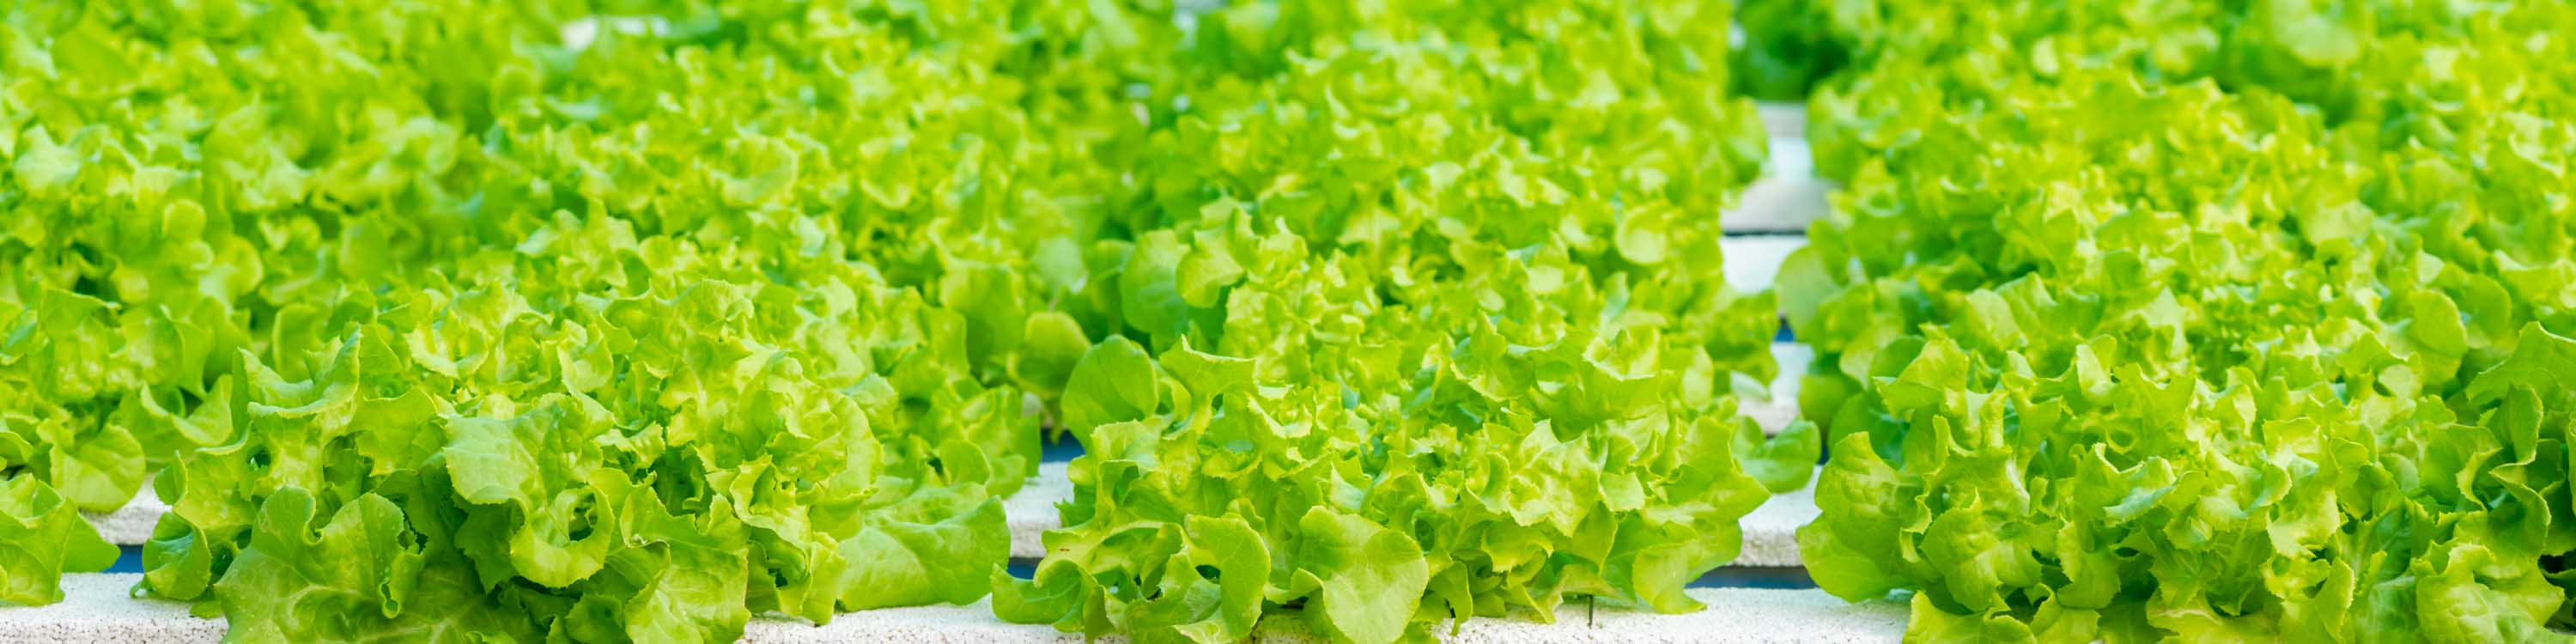 Green leaf lettuce being grown indoors under lights and in hydroponic trays.